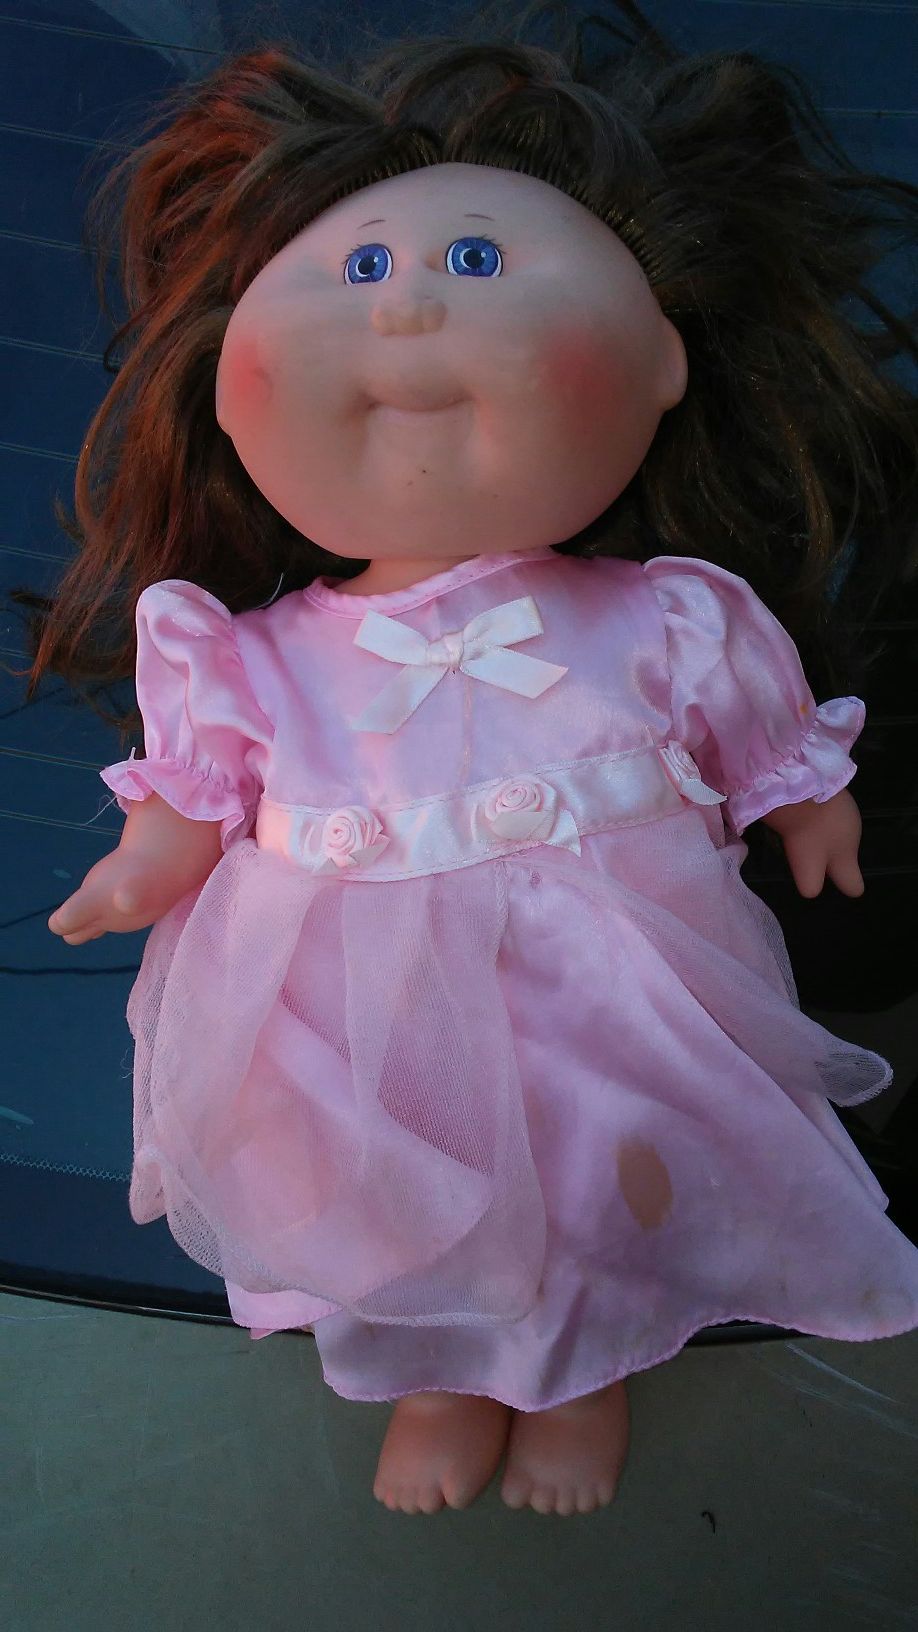 1978 Antique Cabbage Patch Kids Doll